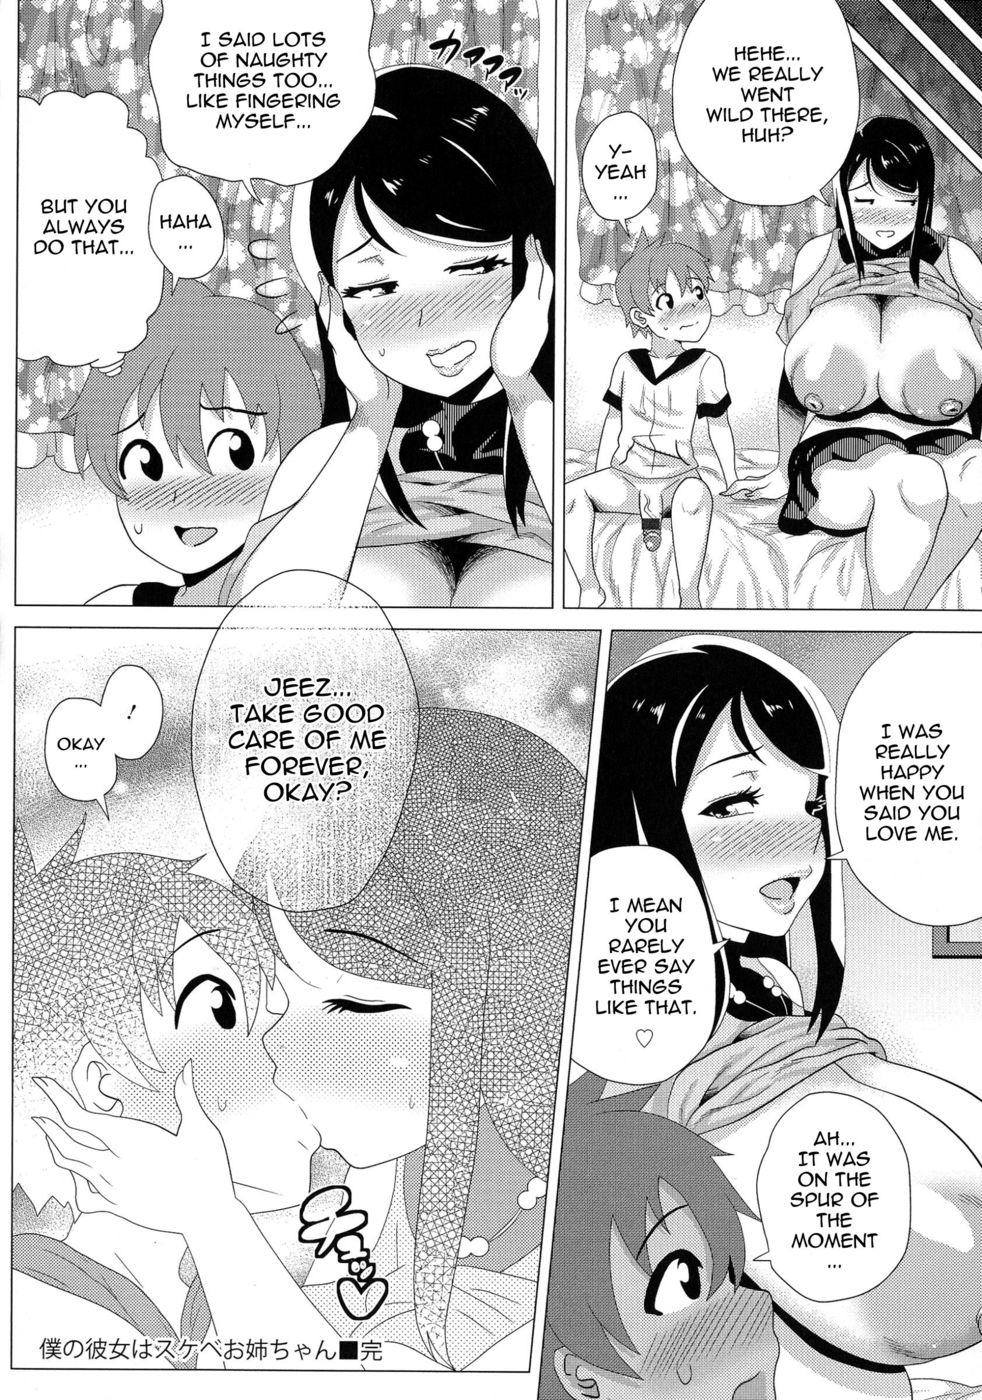 Chacal My Honey is PERVERTED-ONEECHAN HD - Page 20